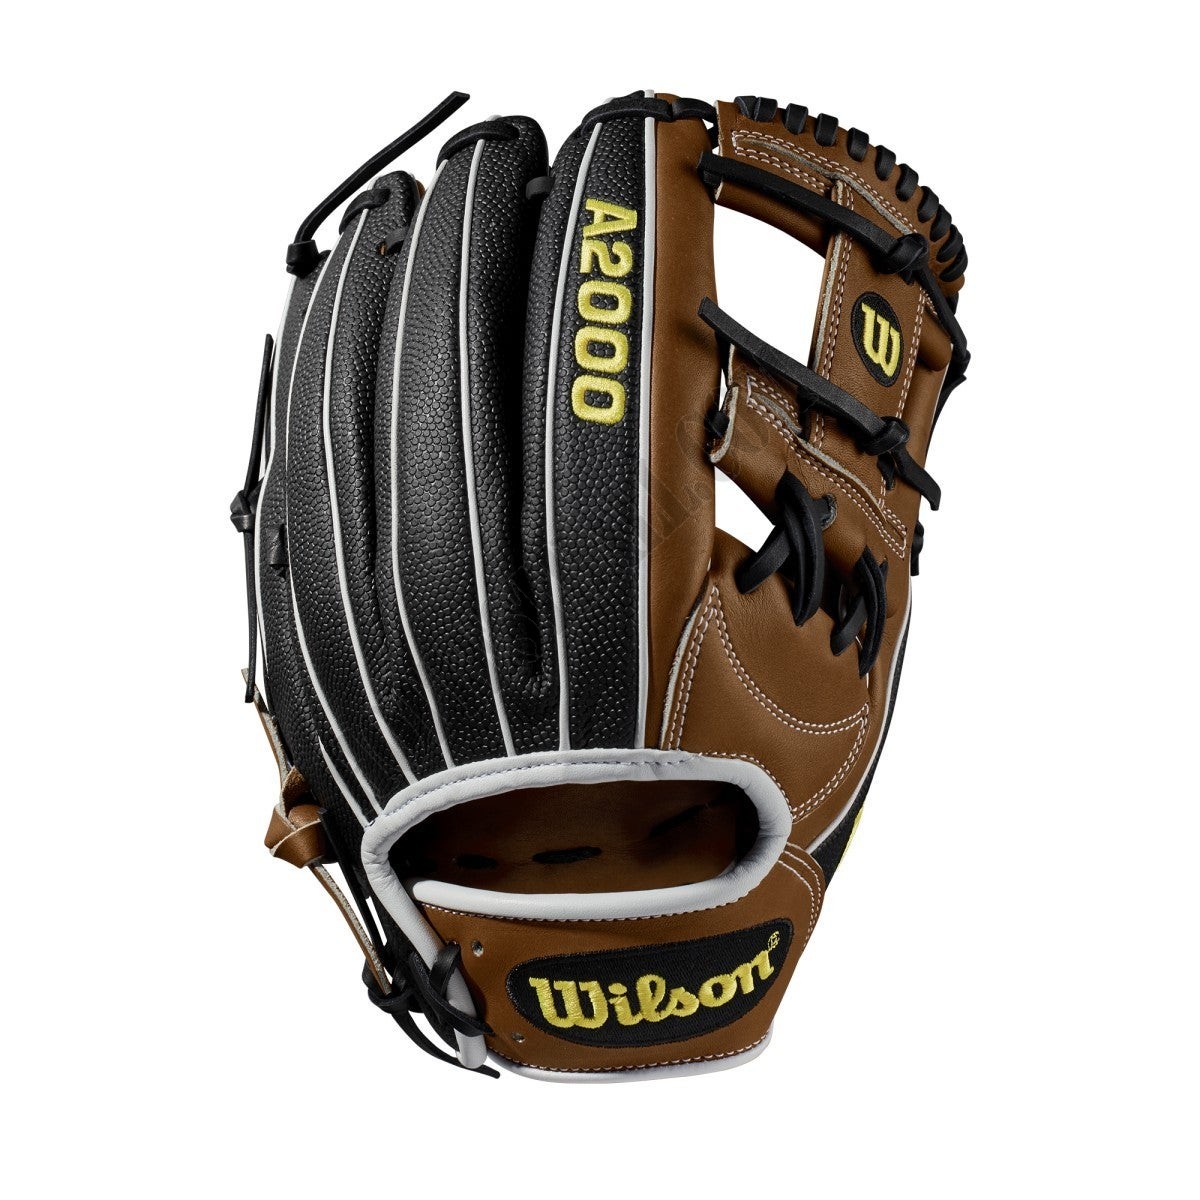 2019 A2000 1787 SuperSkin 11.75" Infield Baseball Glove - Right Hand Throw ● Wilson Promotions - -1